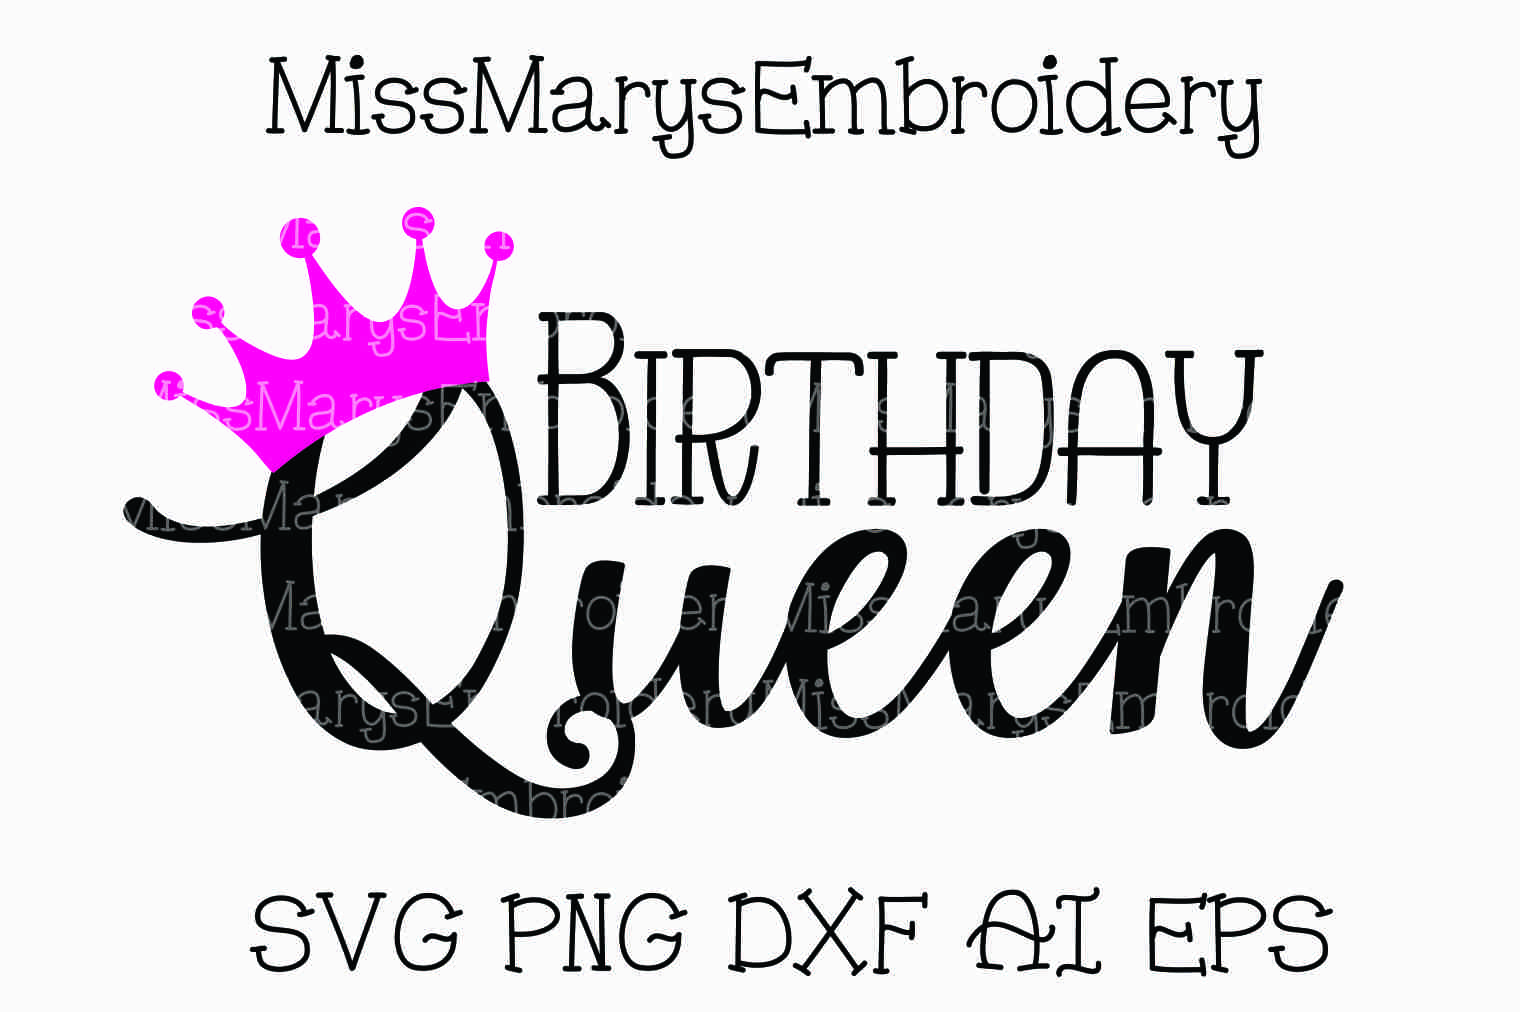 Birthday Queen SVG Cutting File PNG DXF AI EPS (77128 ...